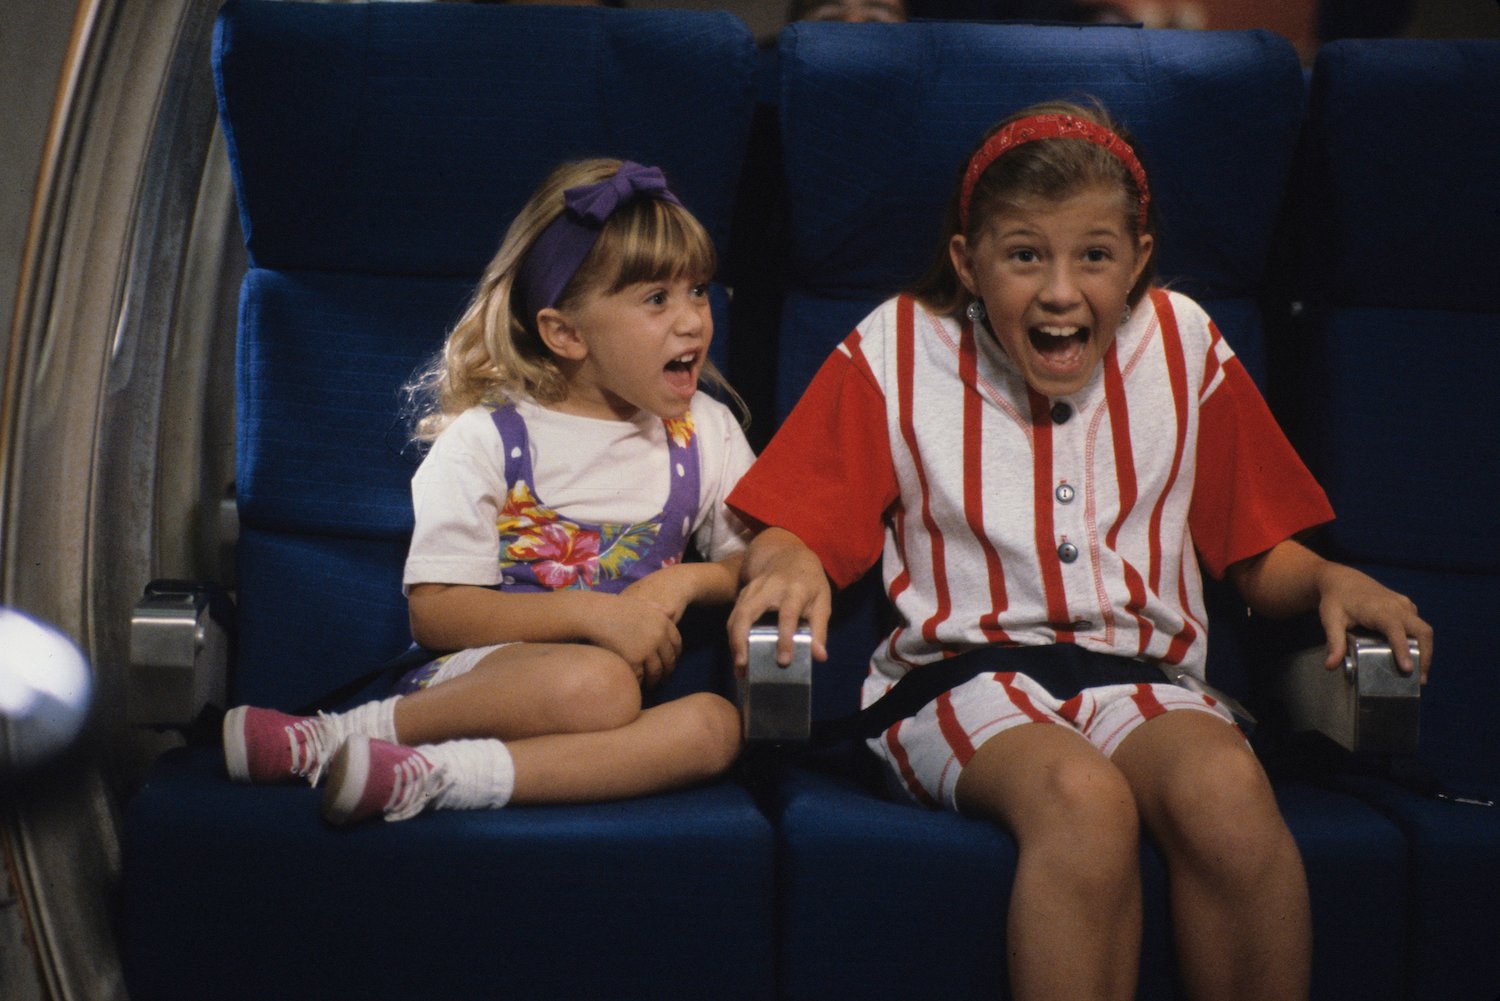 'Full House' Episode Titled 'Come Fly With Me,' featuring Mary-Kate and Ashley Olsen and Jodie Sweetin